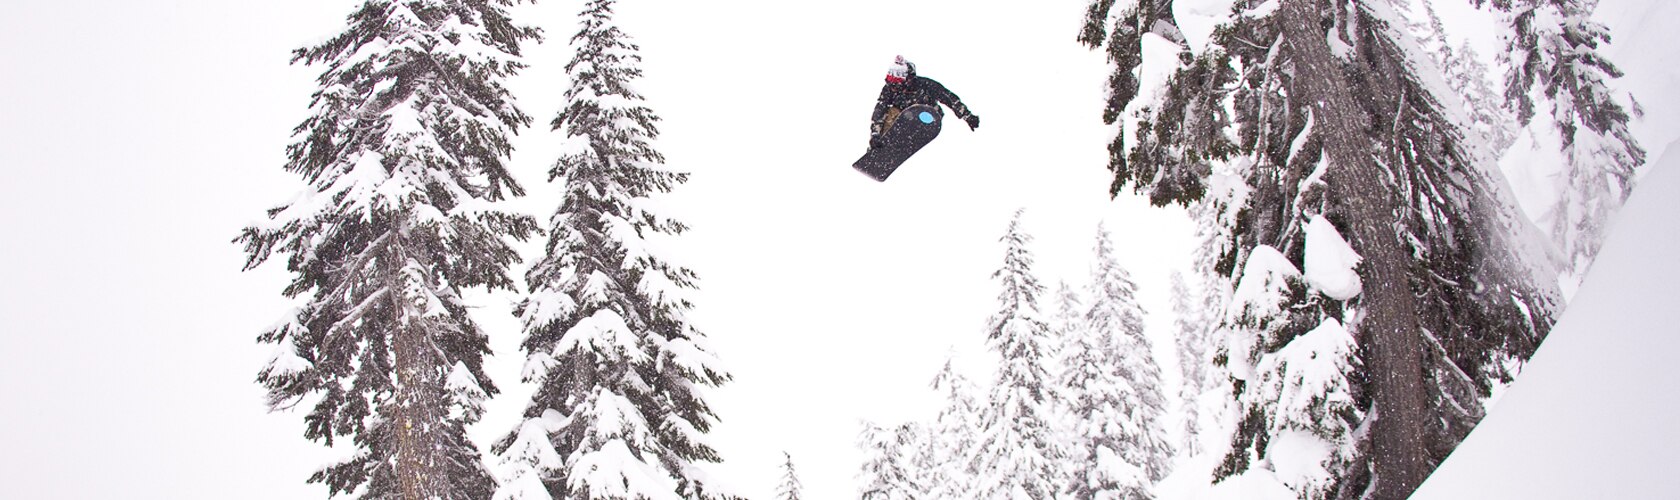 snowboarder flies through air after executing jump through snow covered trees